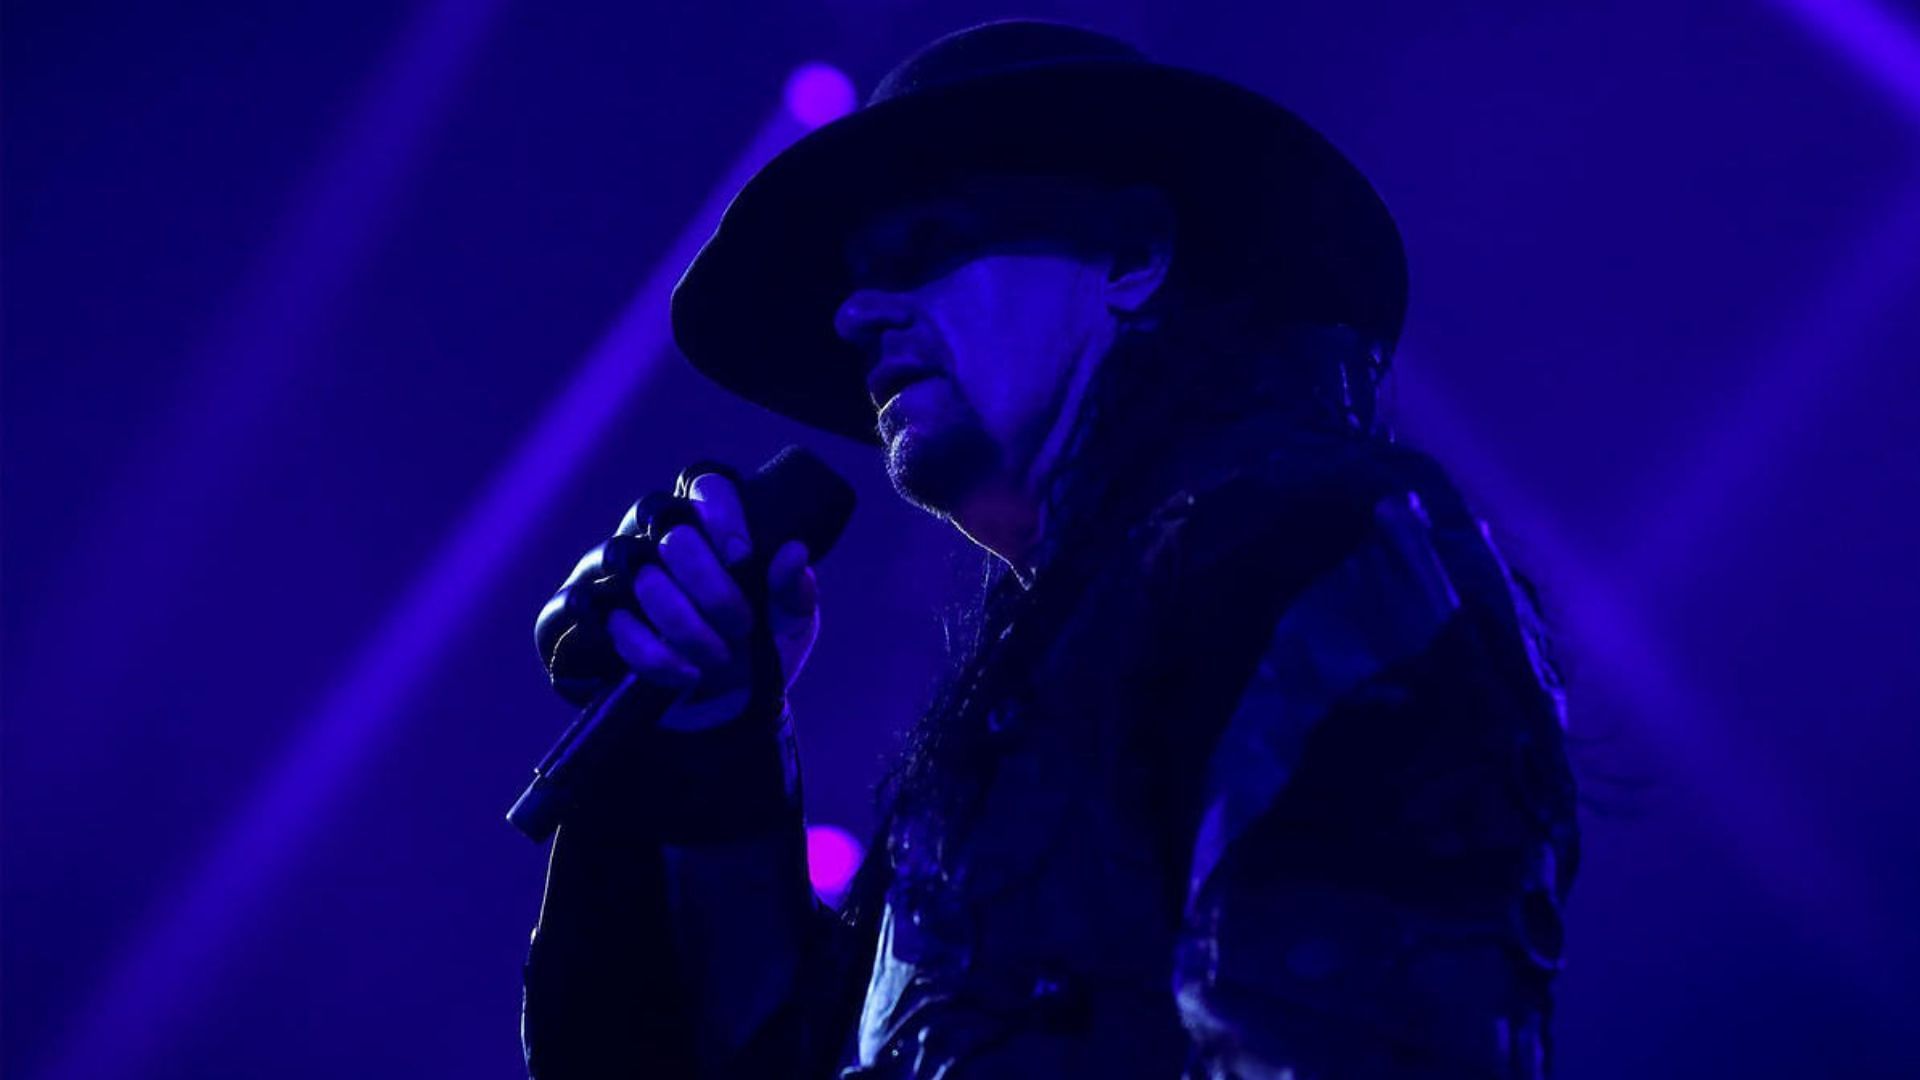 The Undertaker headlined Hall of Fame 2022!